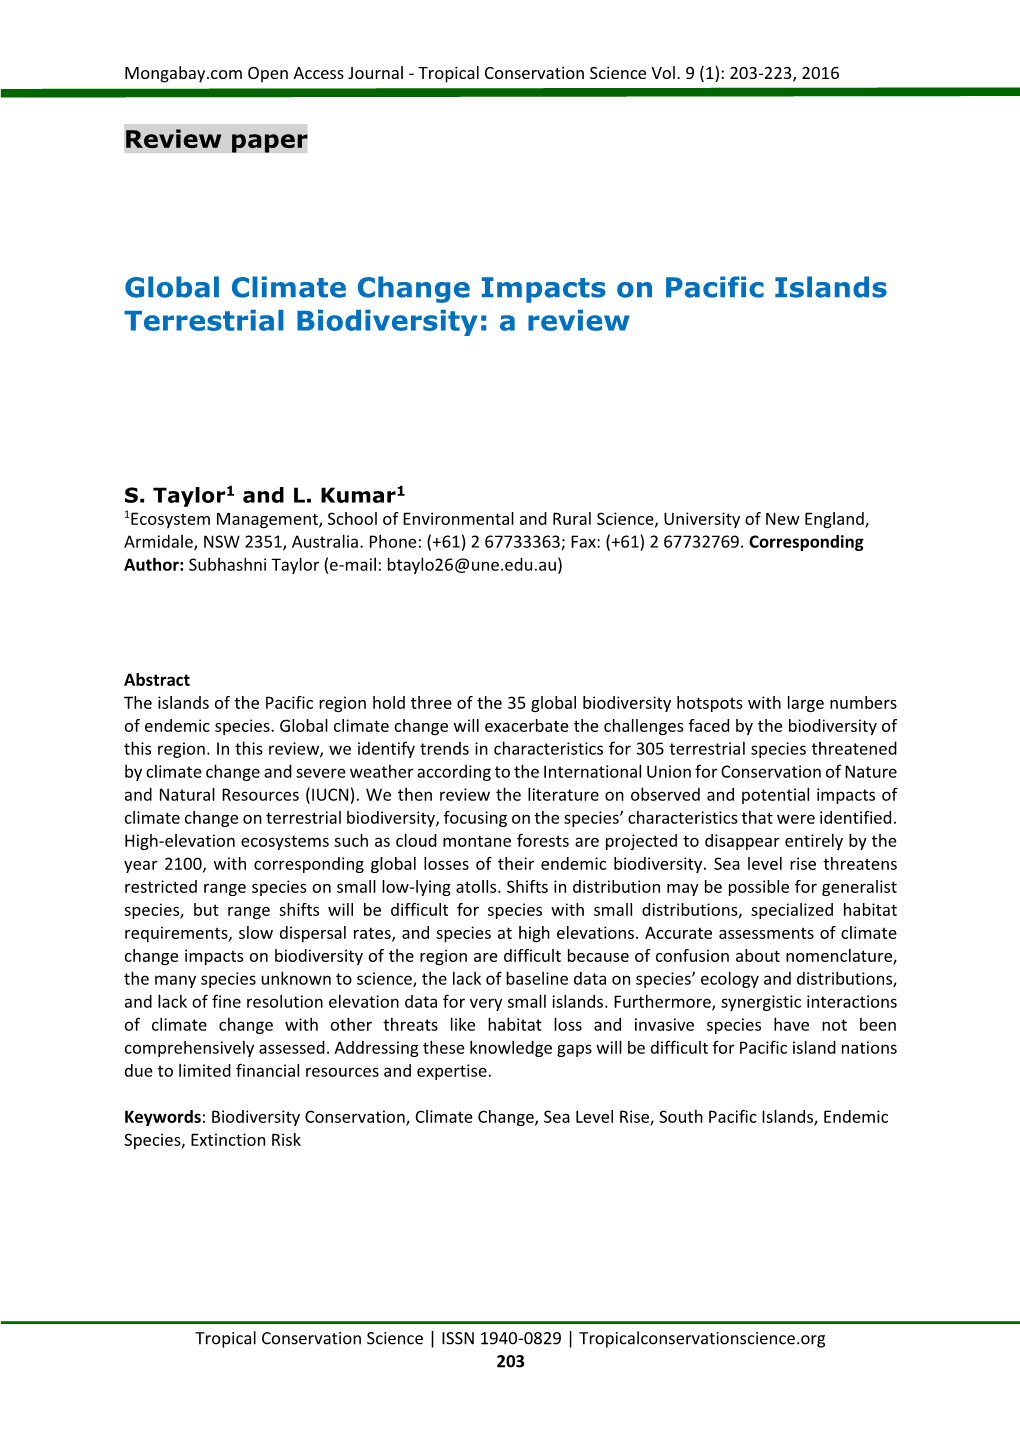 Global Climate Change Impacts on Pacific Islands Terrestrial Biodiversity: a Review